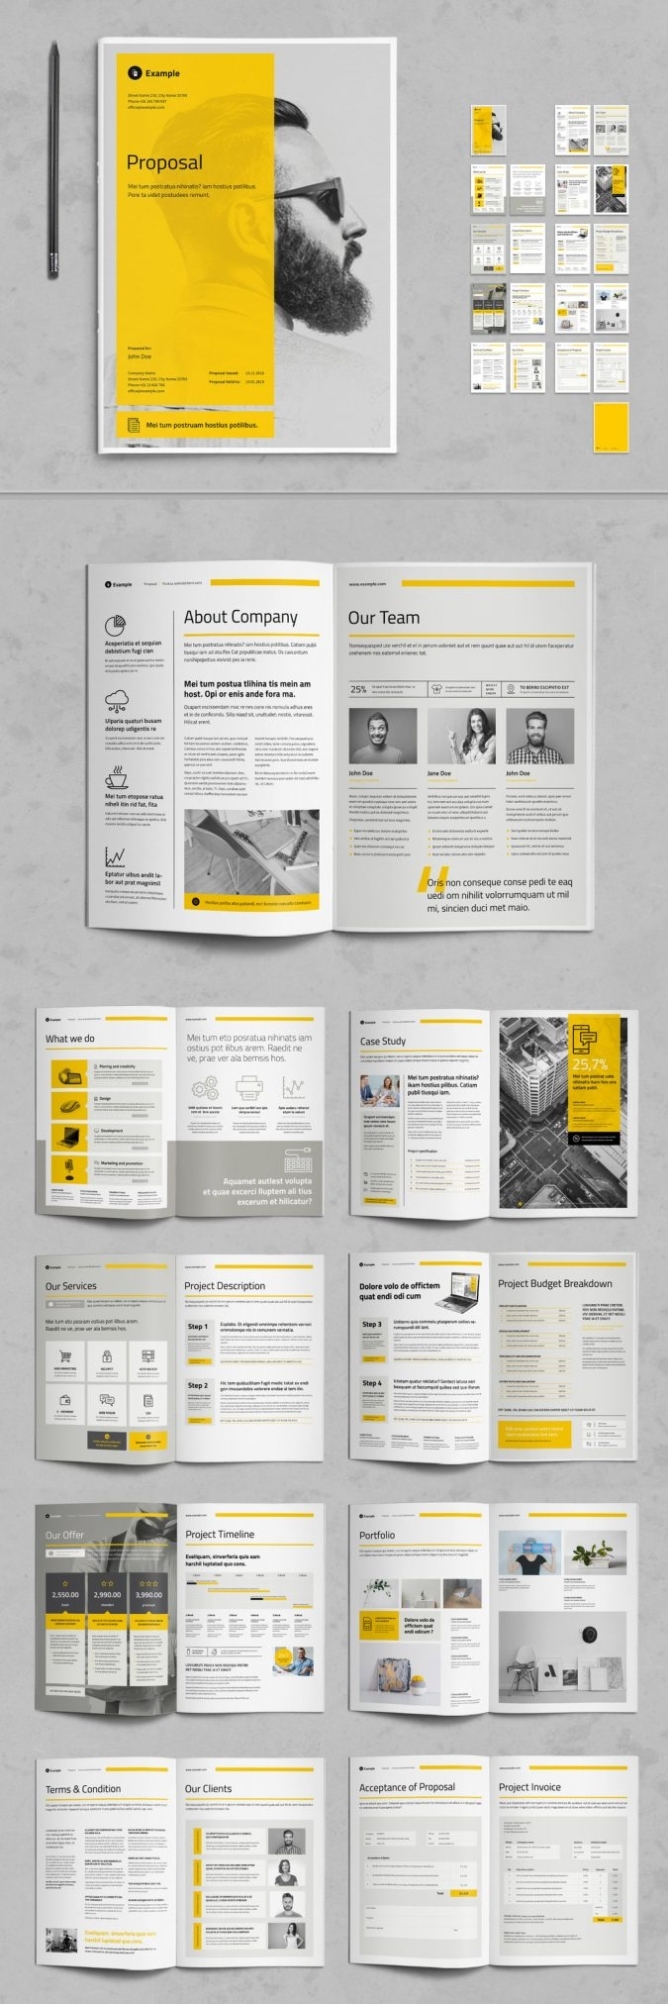 A Business Proposal Template With Yellow And Gray Accents For Adobe With Business Plan Template Indesign